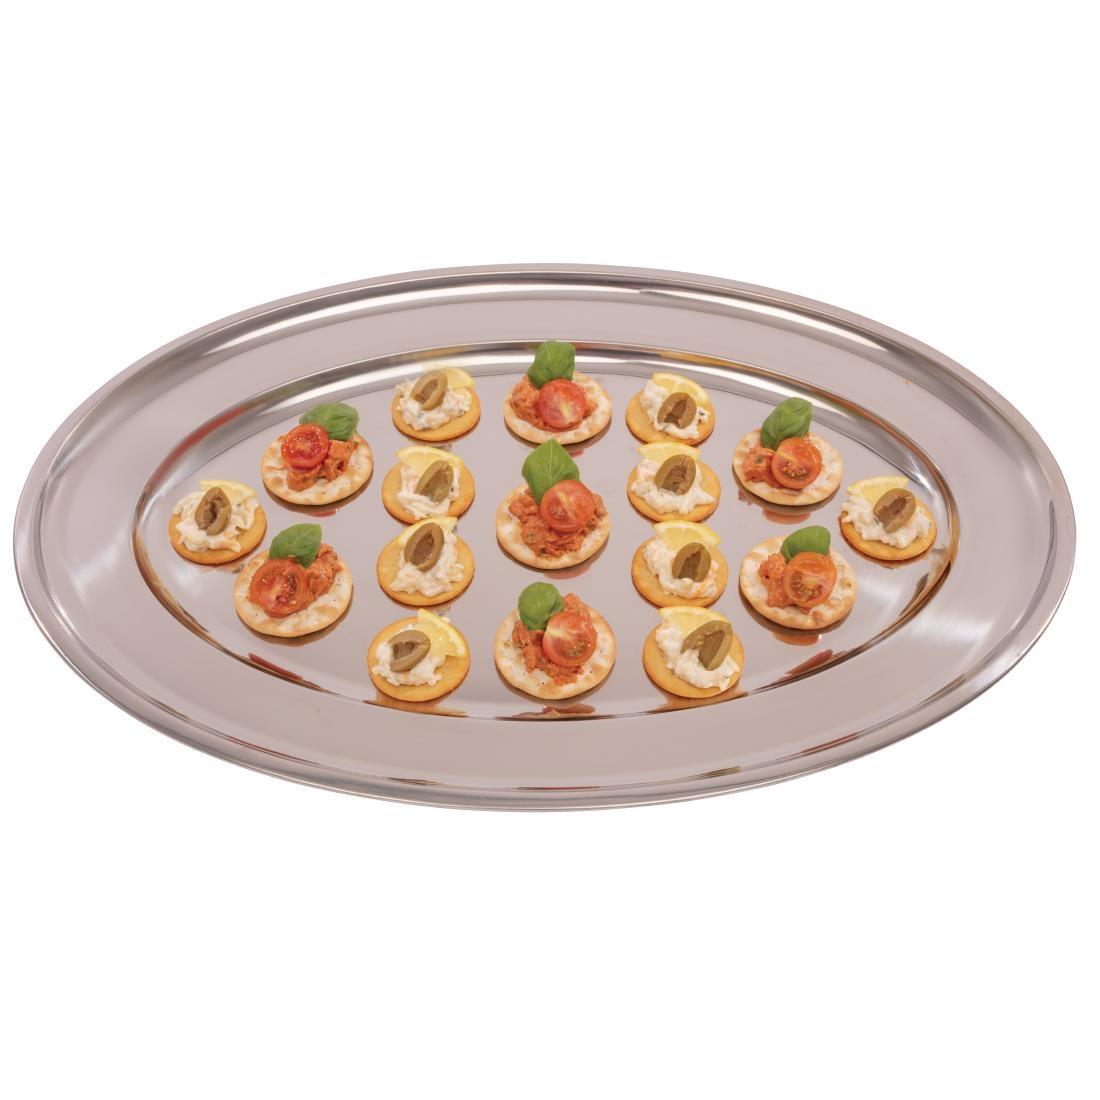 Olympia Stainless Steel Oval Serving Tray 605mm - K369  - 3